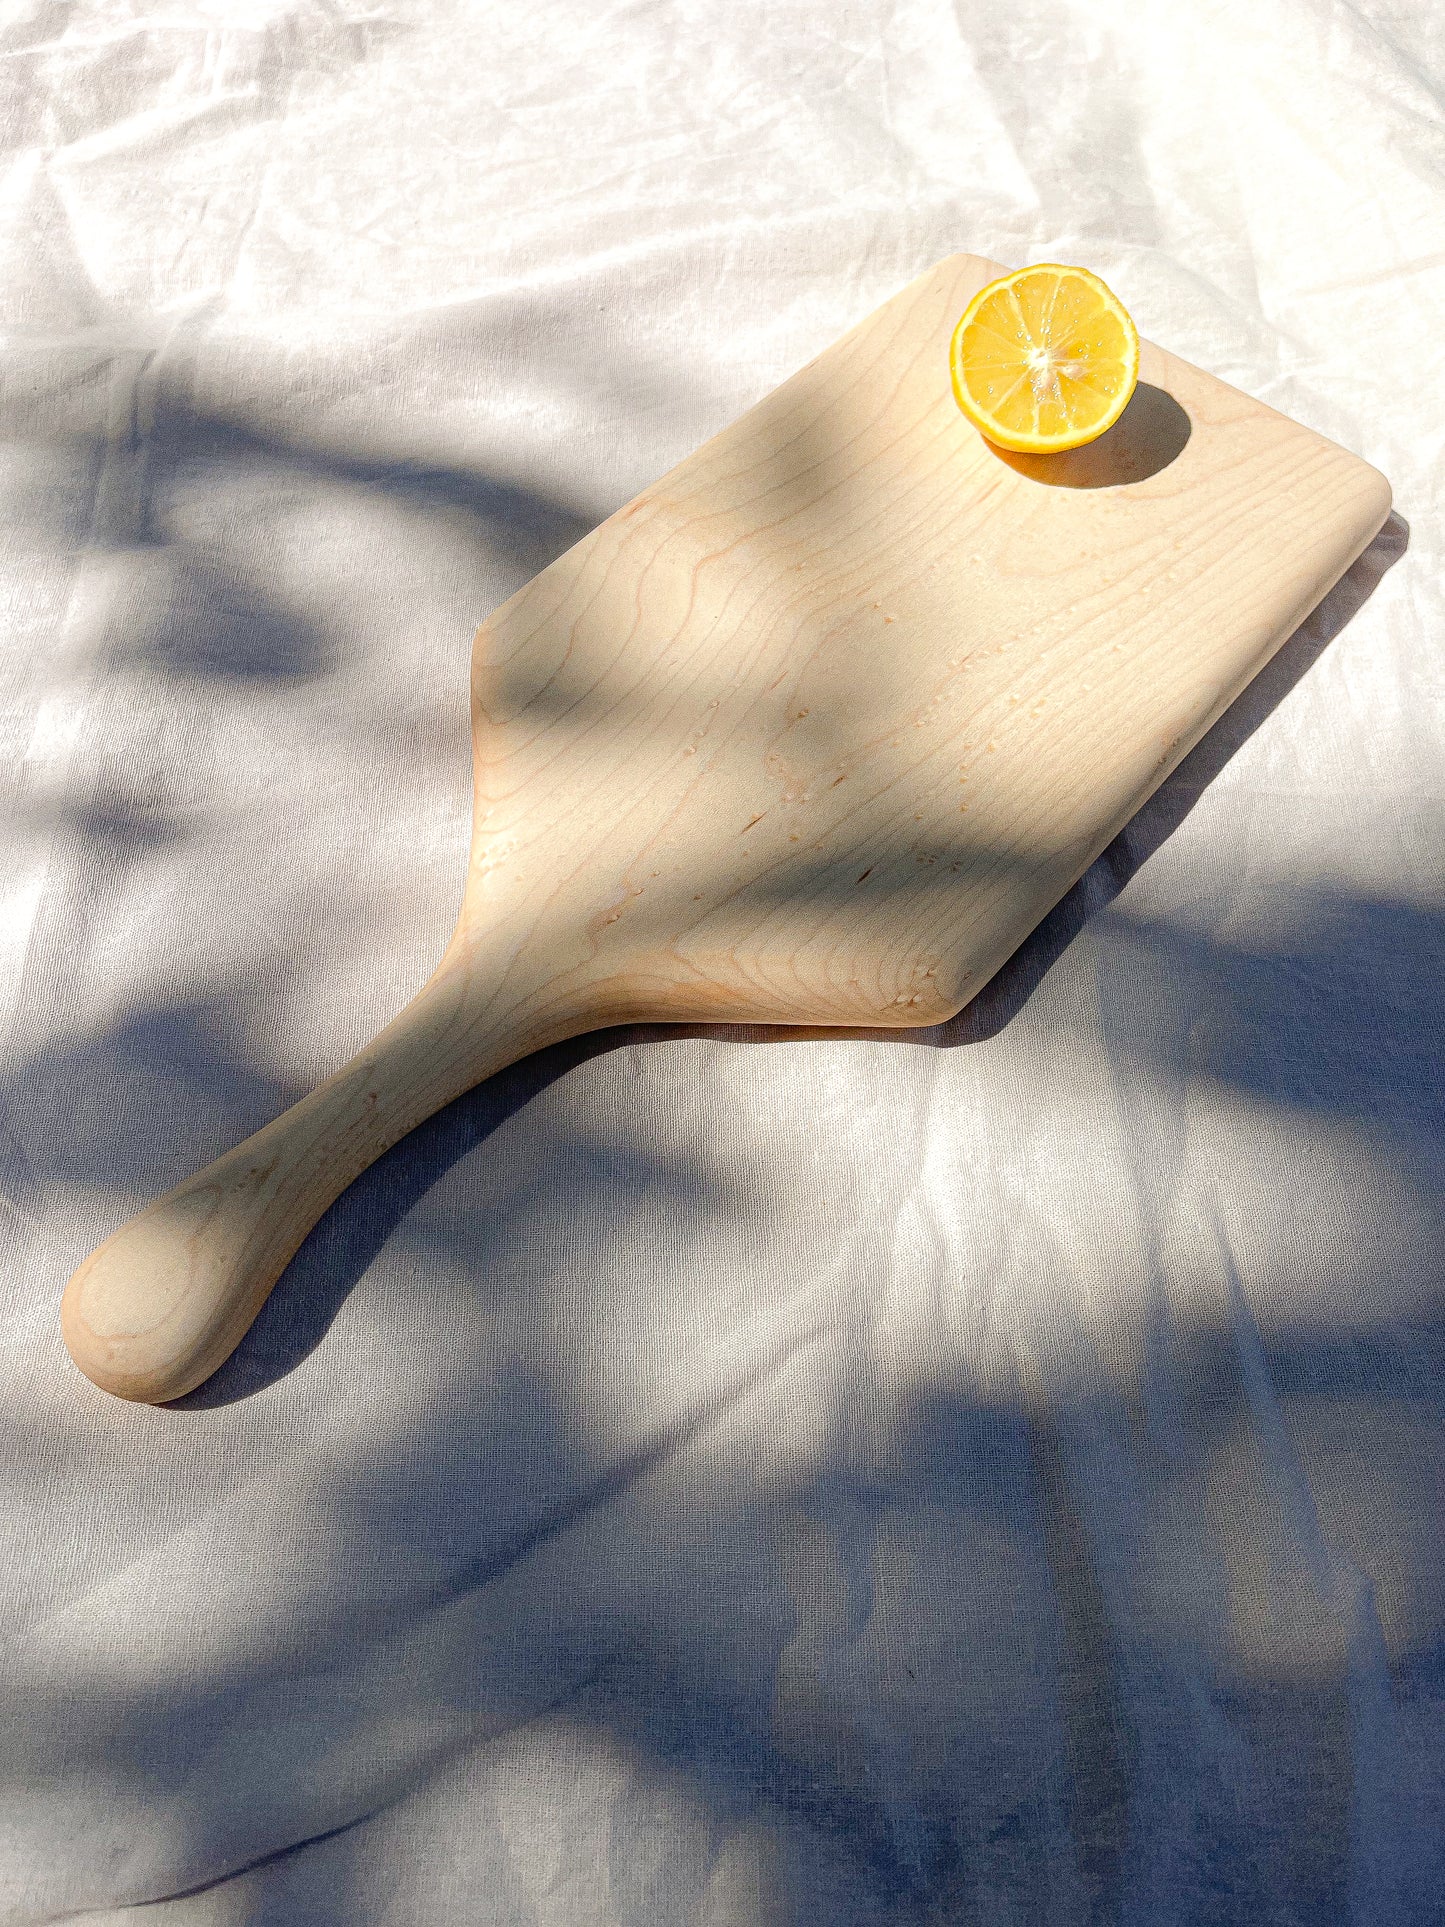 Hand-crafted cheeseboard perfect for a display of cheese or appetizers. The handle is perfect for carrying to the table, and adds visual interest. Made sustainably from maple wood in Gatineau, Canada.